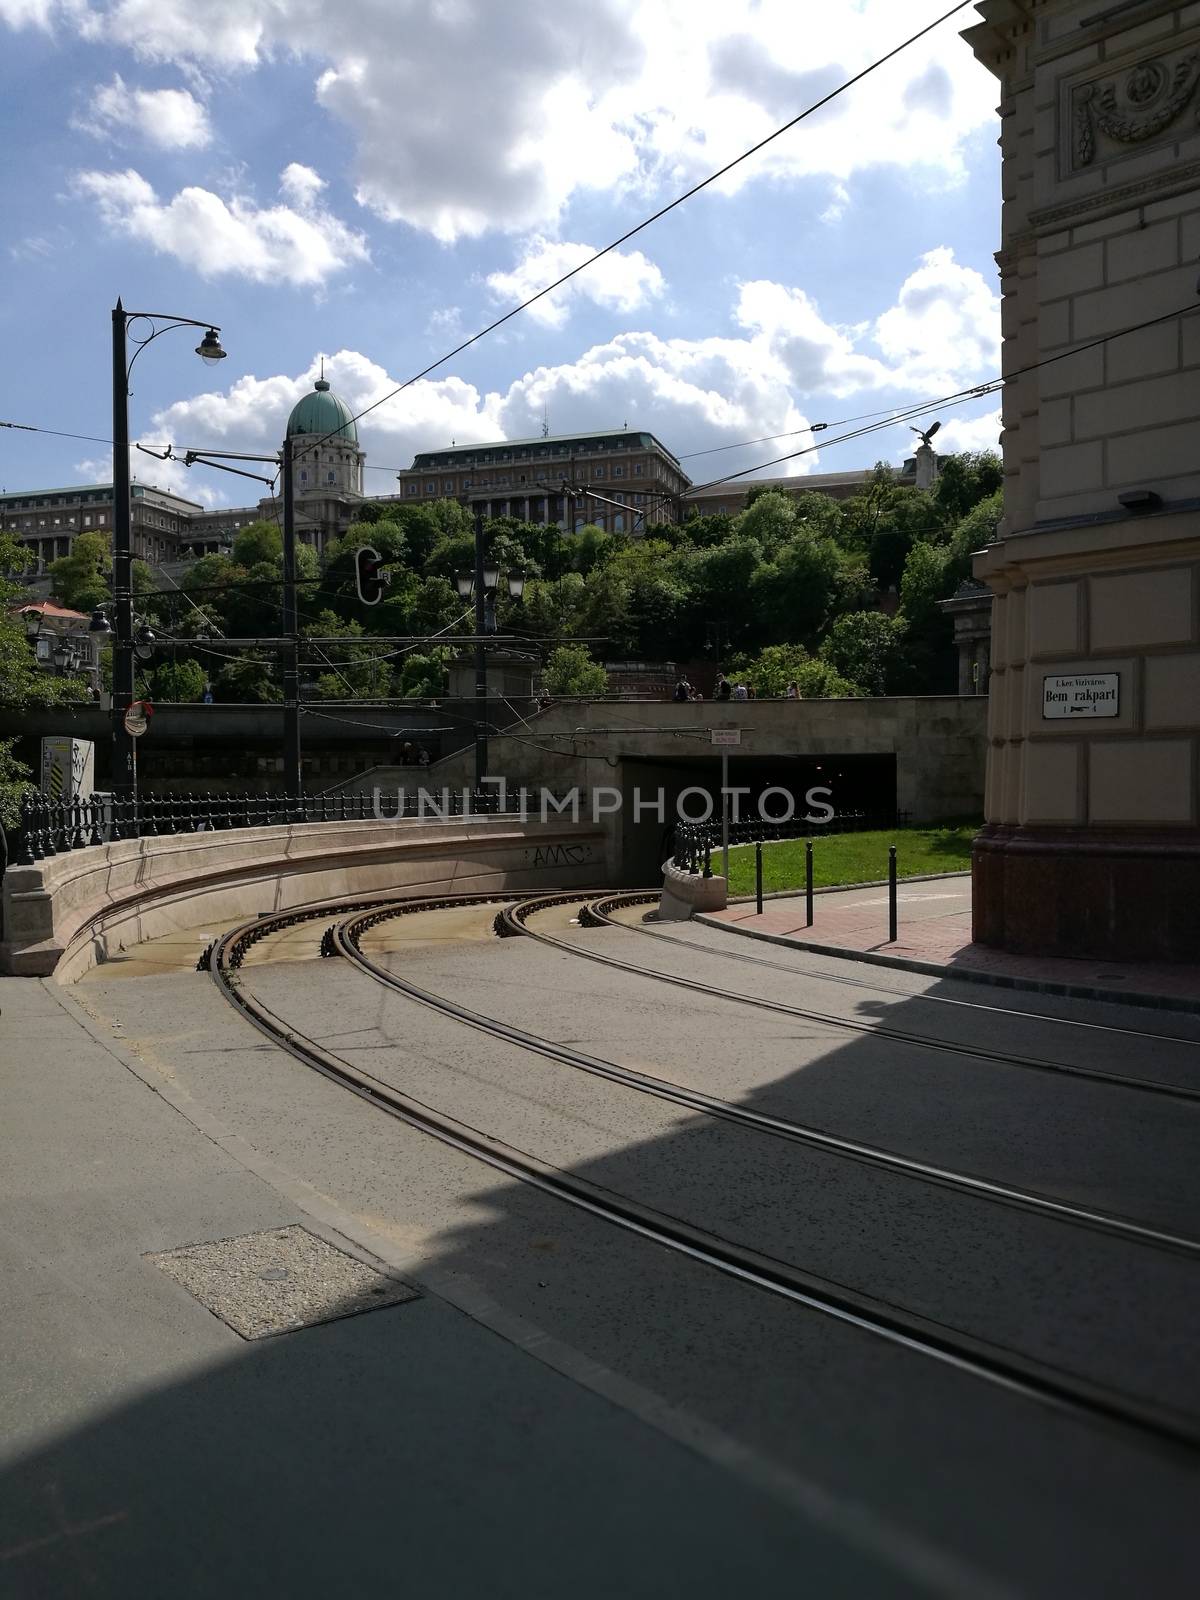 The Buda Castle with the railway tracks by balage941